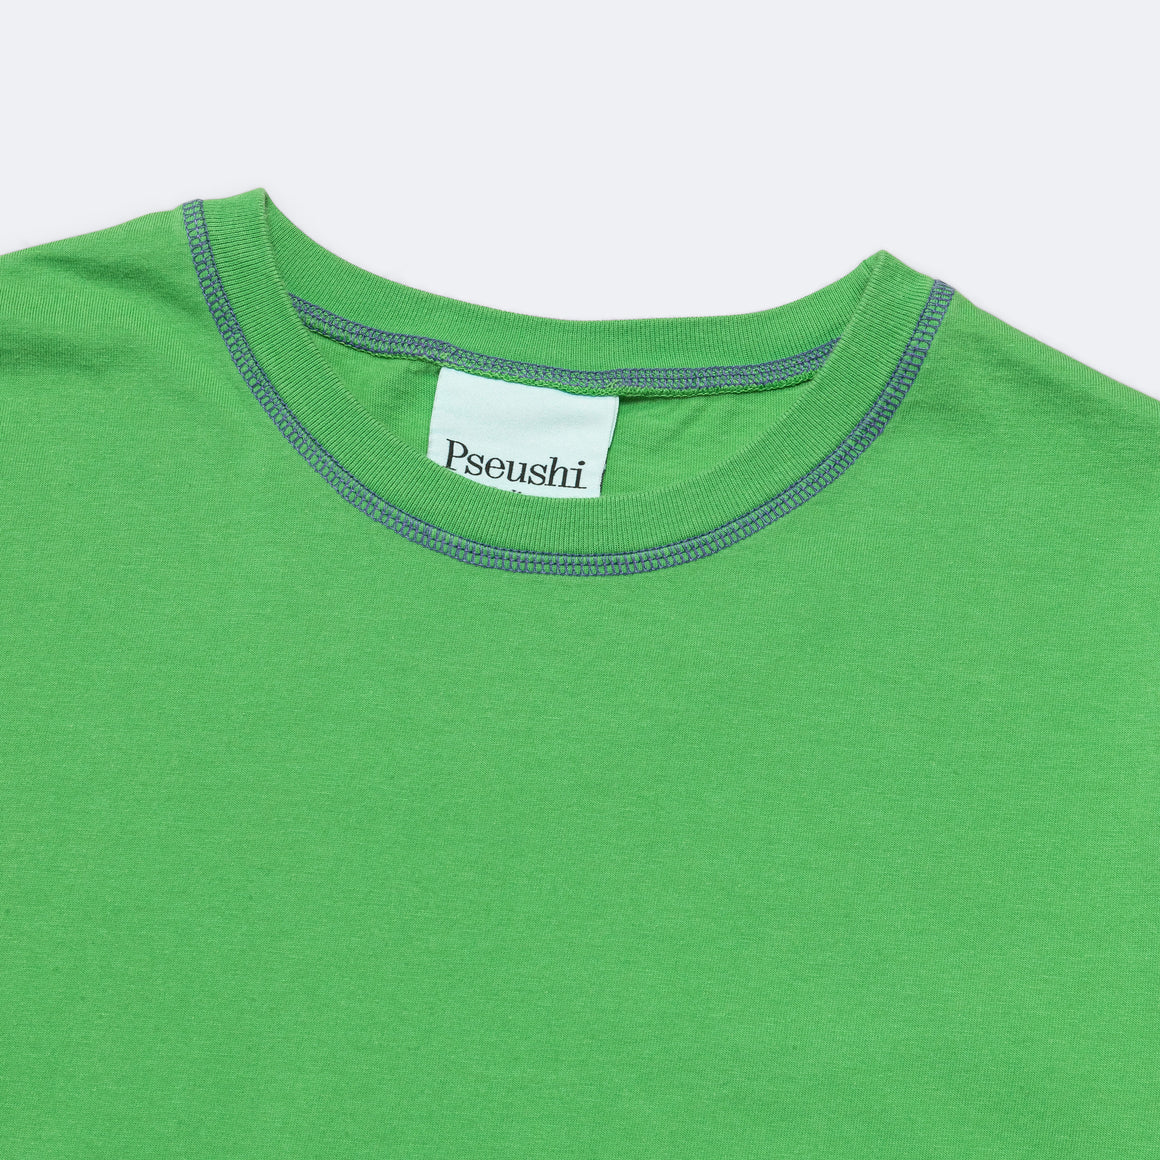 Pseushi - Contrast Stitch Tee - Green/Purple - UP THERE